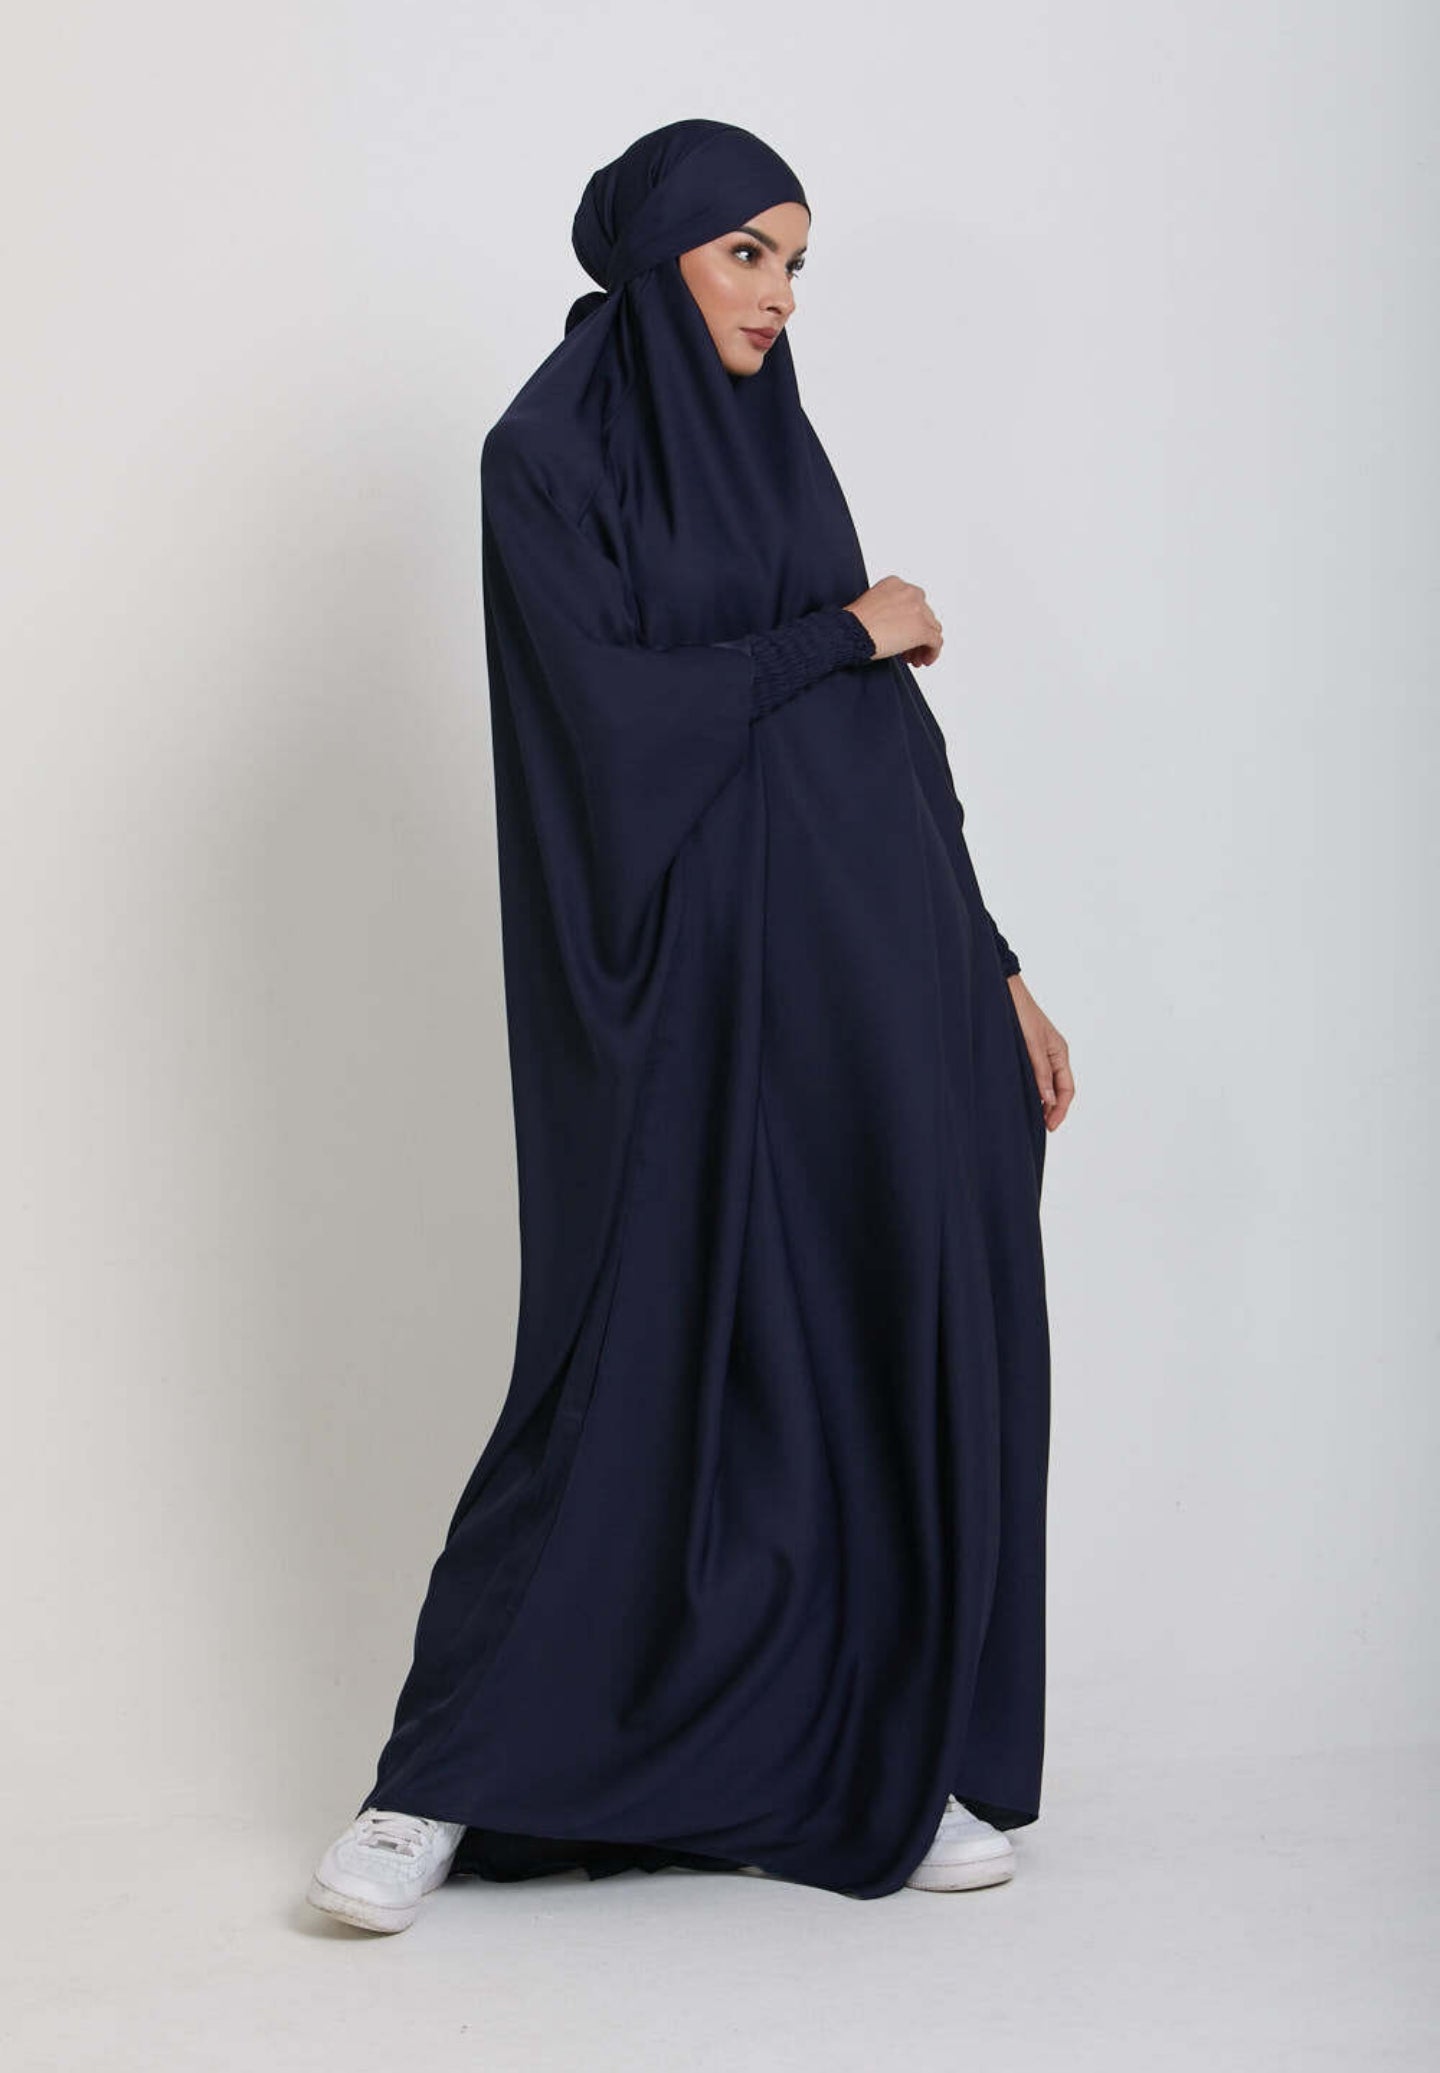 Dive into divine tranquility with our Navy One Piece Tie-Up Jilbab. This exclusive Islamic garment seamlessly blends modesty with contemporary allure, creating a captivating fusion of grace and comfort for your sacred moments of devotion.